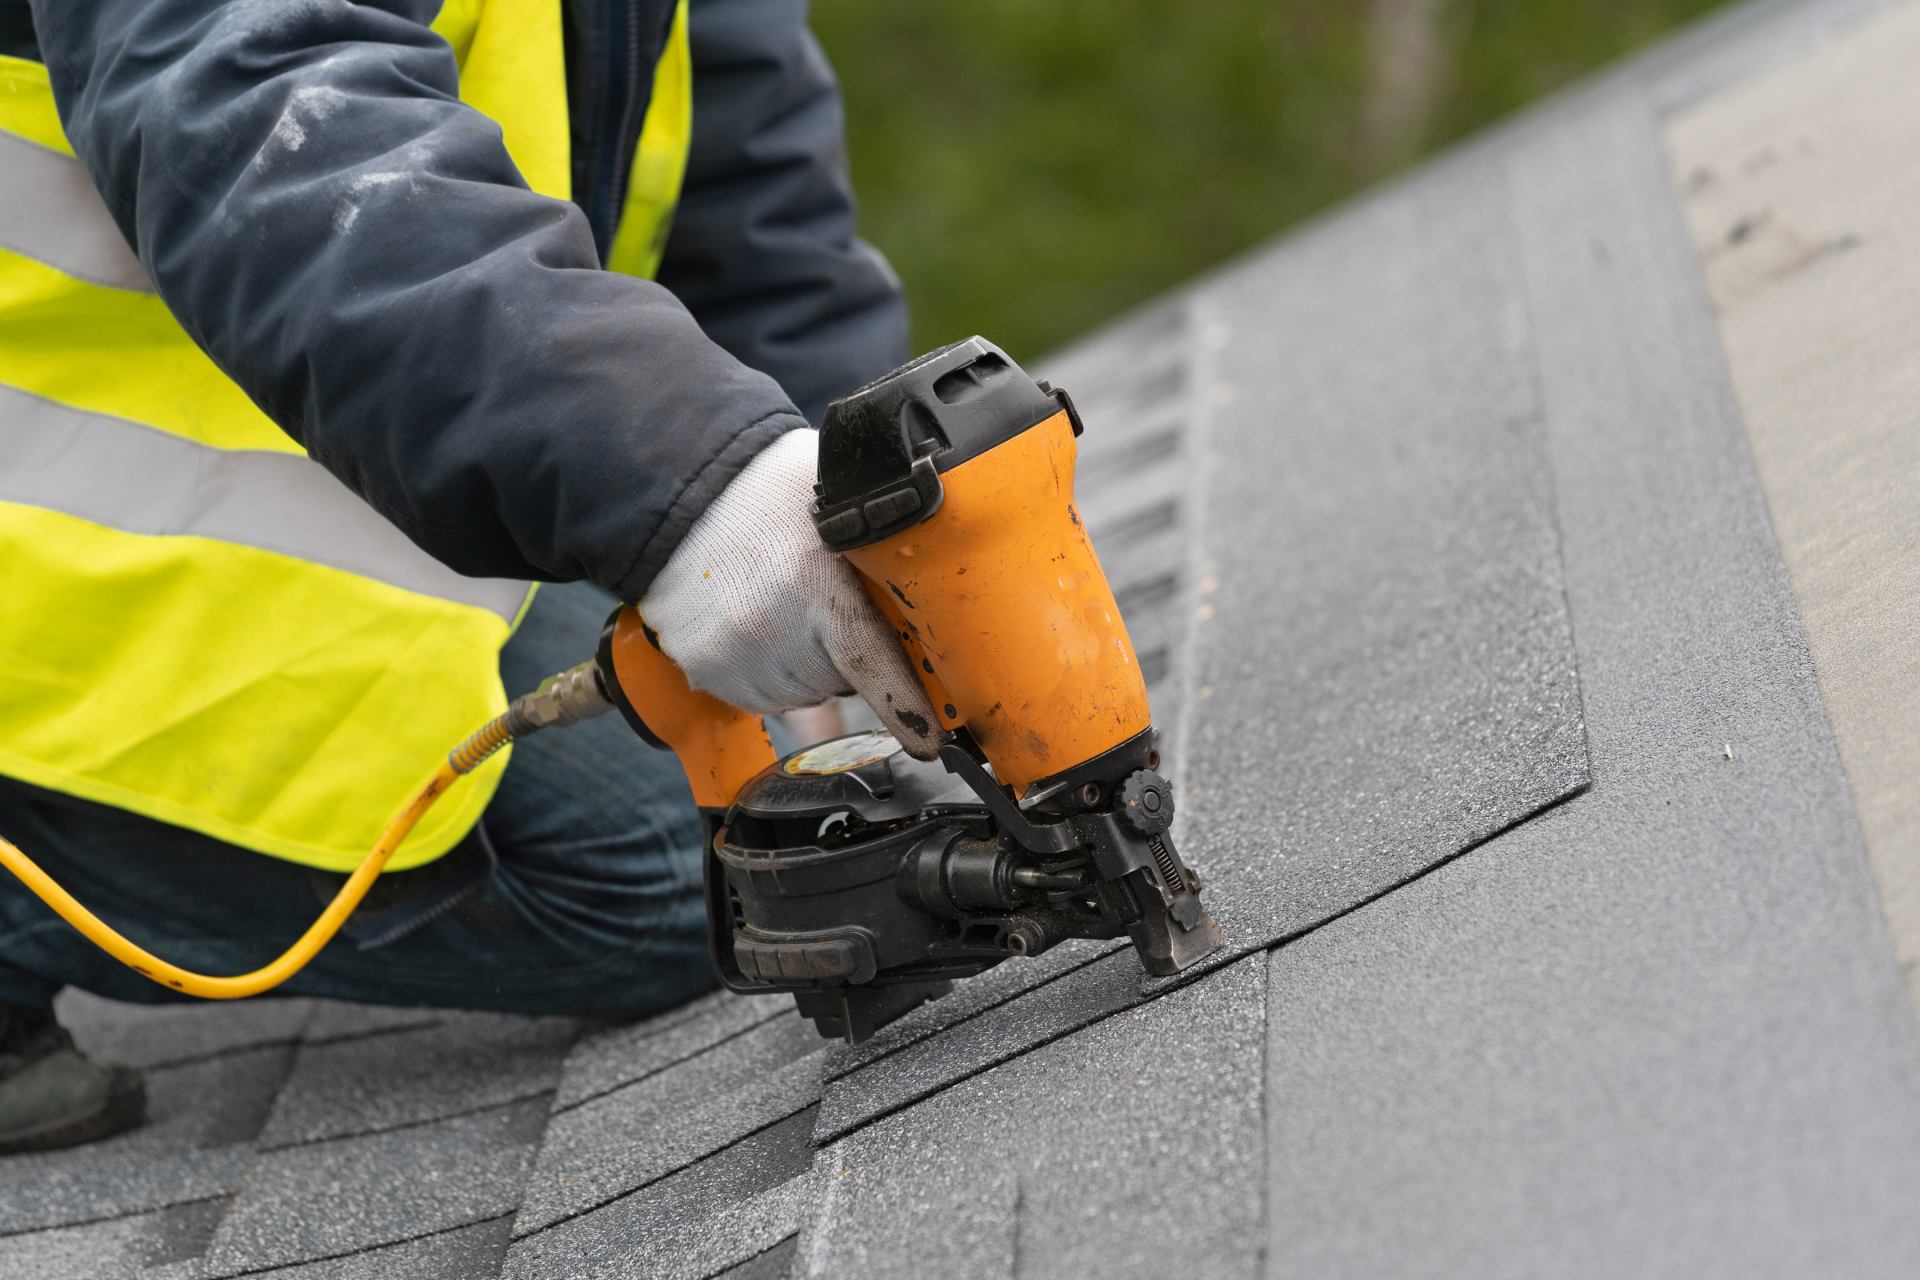 Qualified roofer worker in protective uniform using air or pneumatic nail gun and installing asphalt or bitumen shingle on top of the new roof under construction residential building